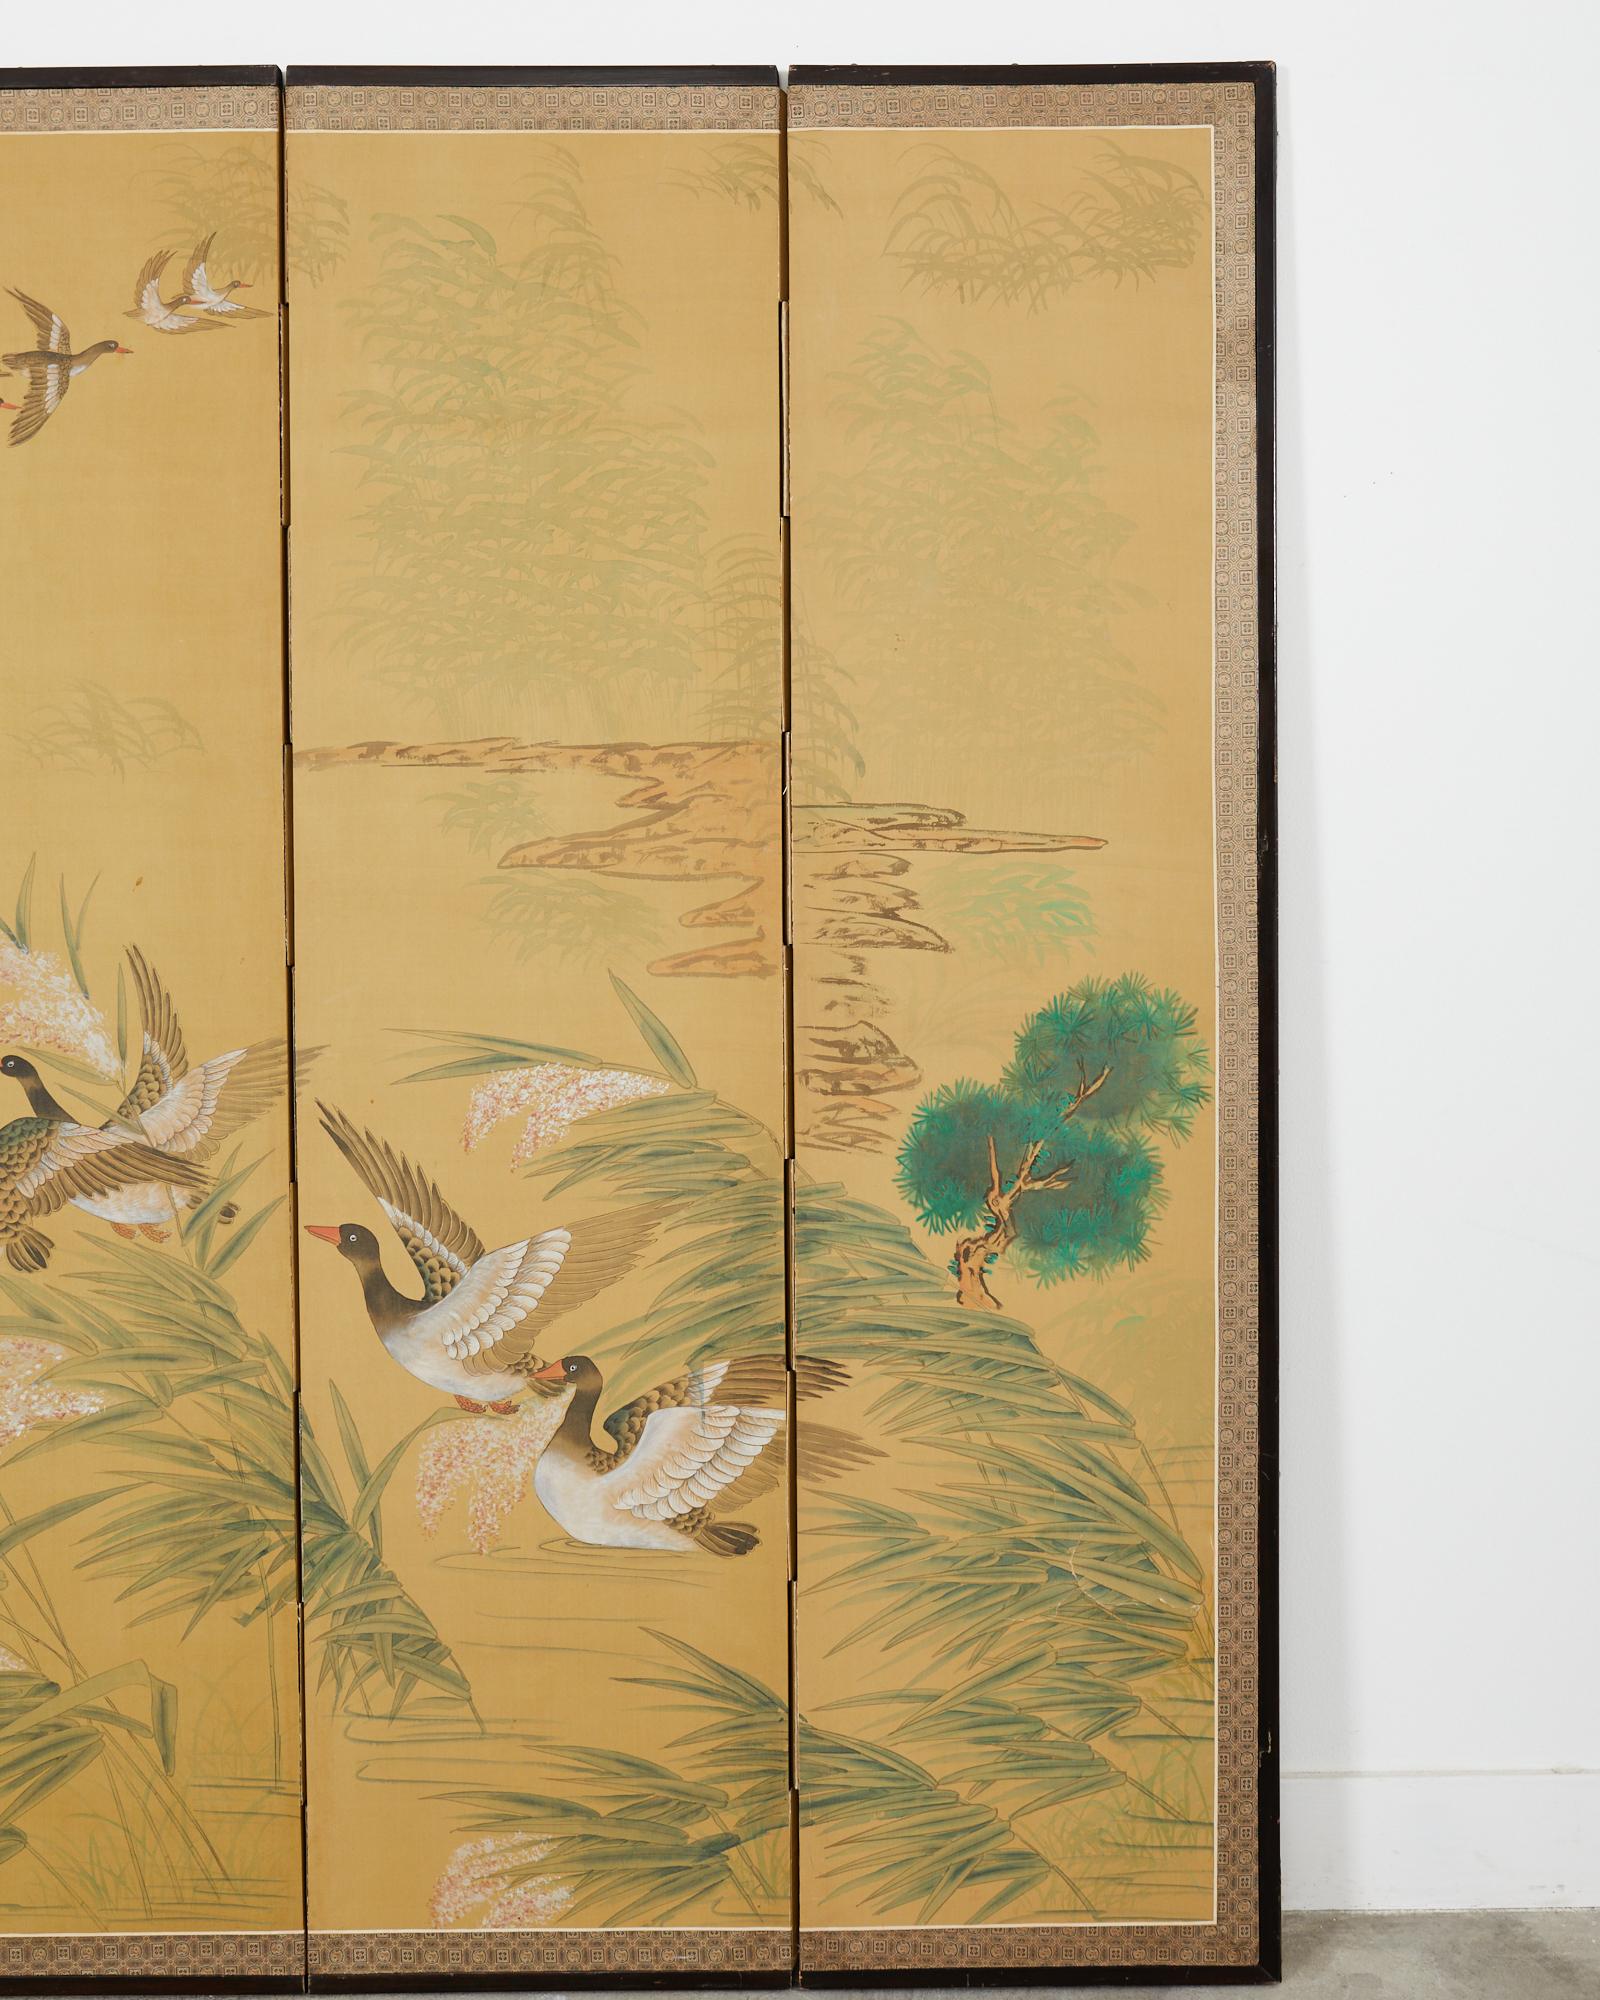 Korean Japanese Style Four Panel Screen Geese Flight Over Reeds For Sale